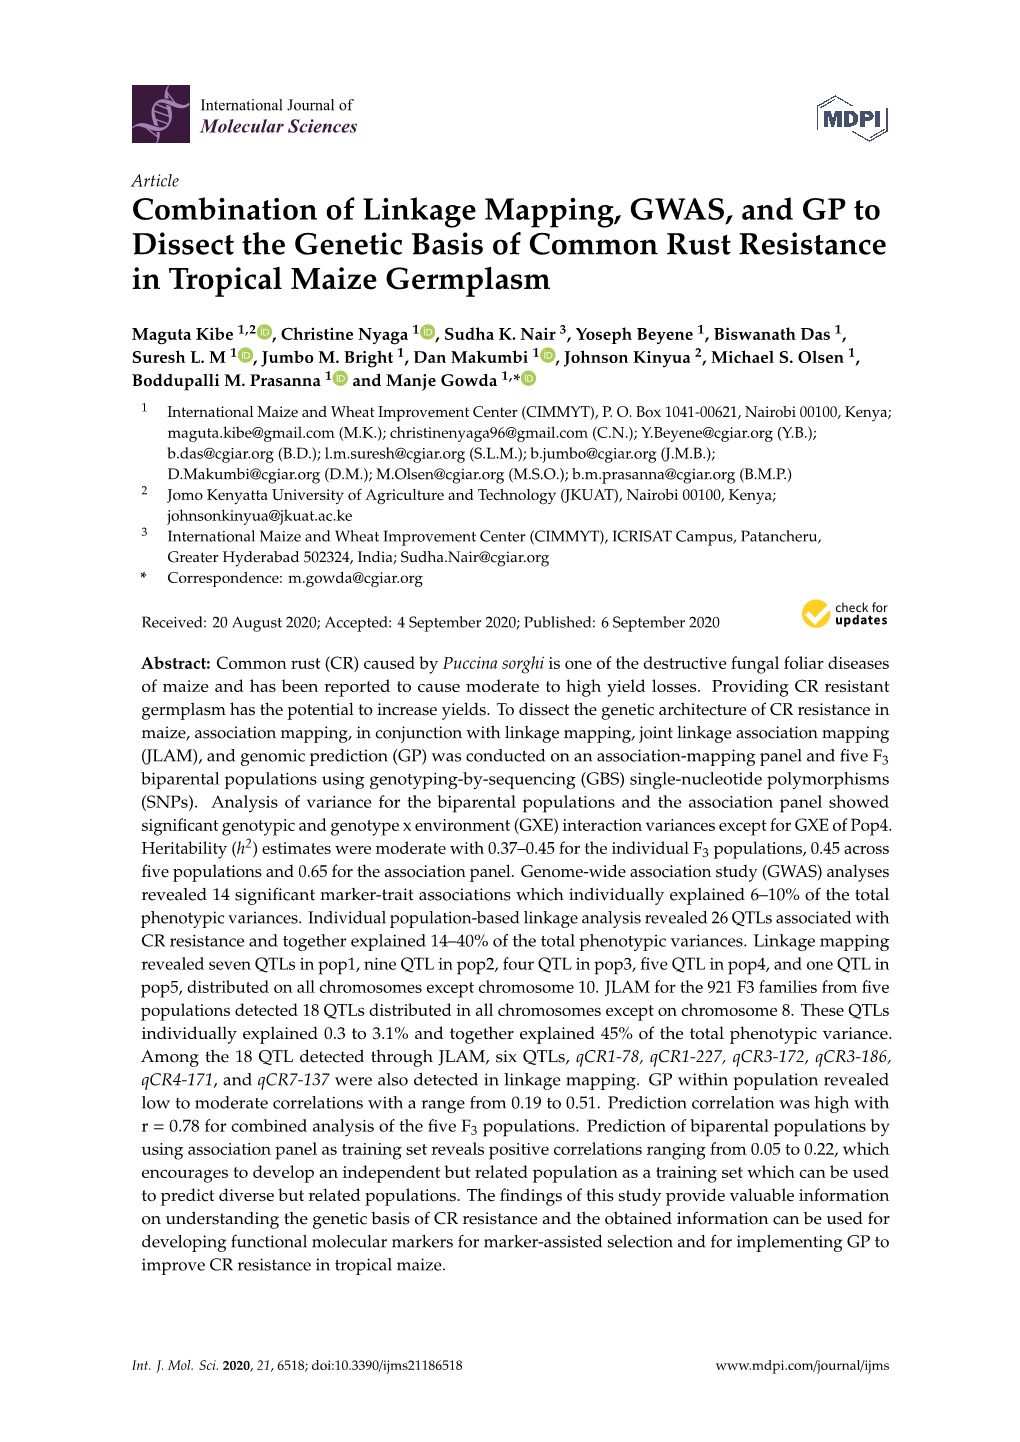 Combination of Linkage Mapping, GWAS, and GP to Dissect the Genetic Basis of Common Rust Resistance in Tropical Maize Germplasm